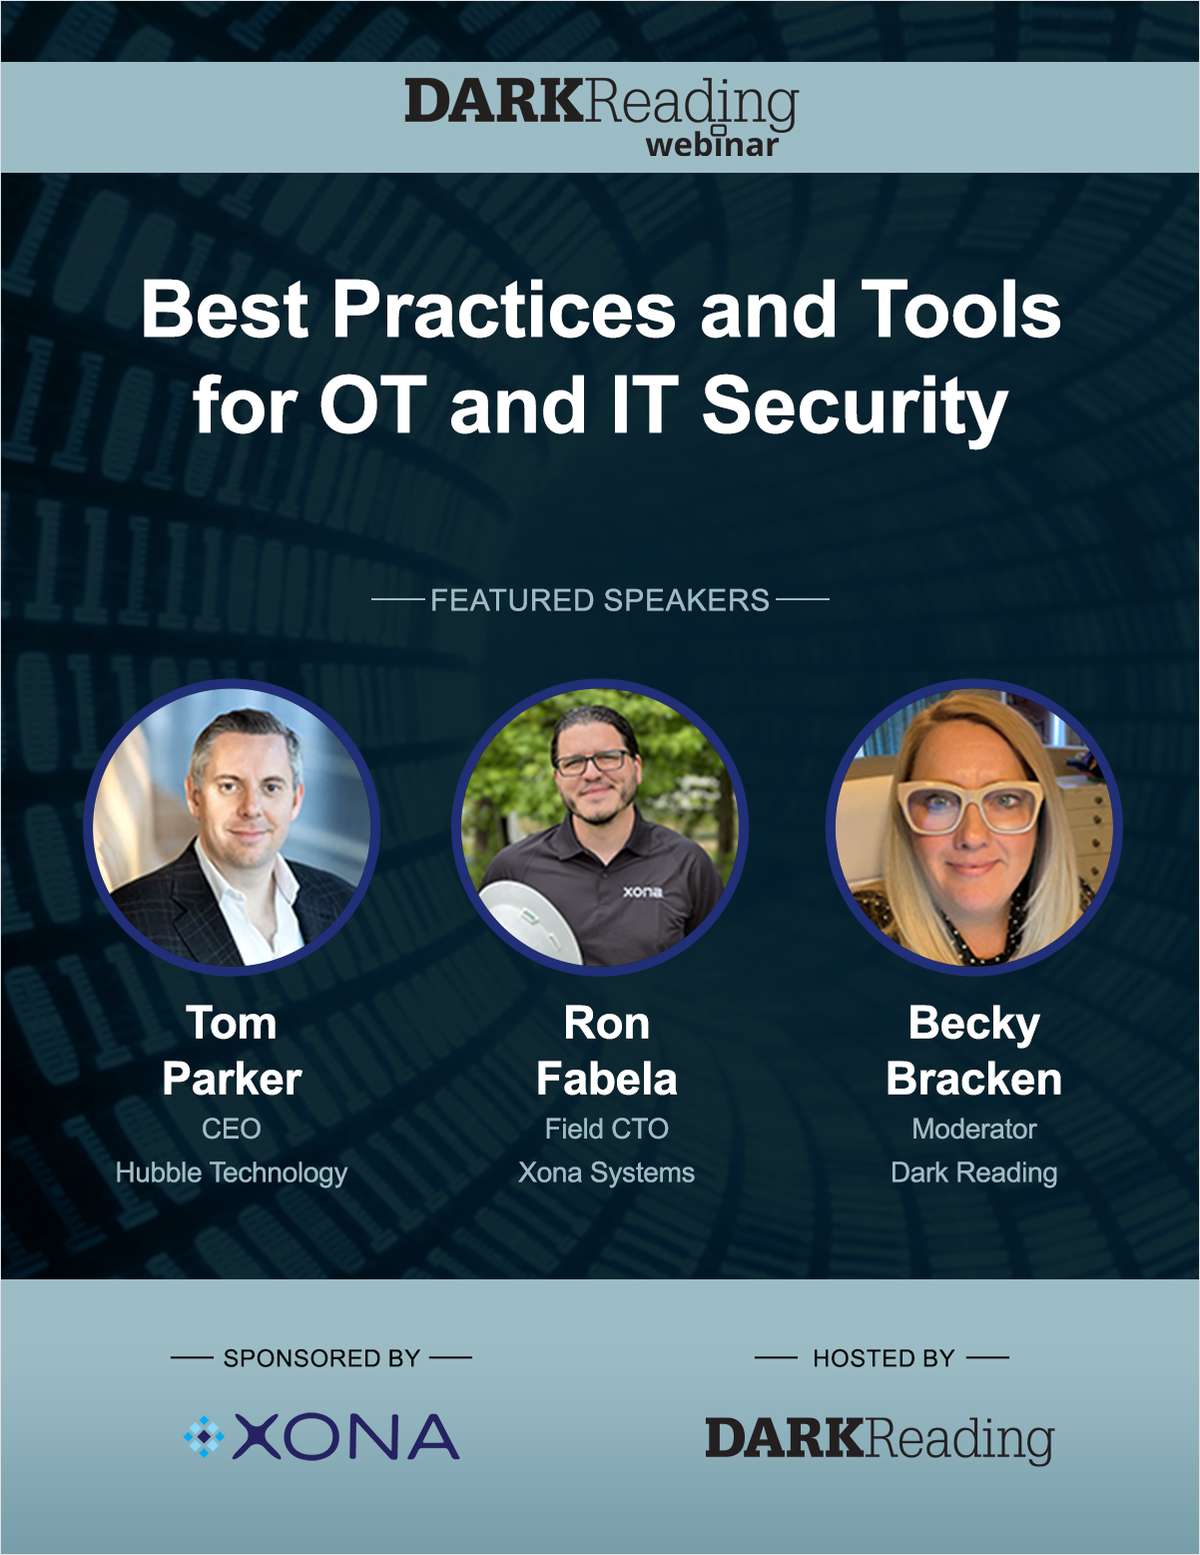 Best Practices and Tools for OT and IT Security